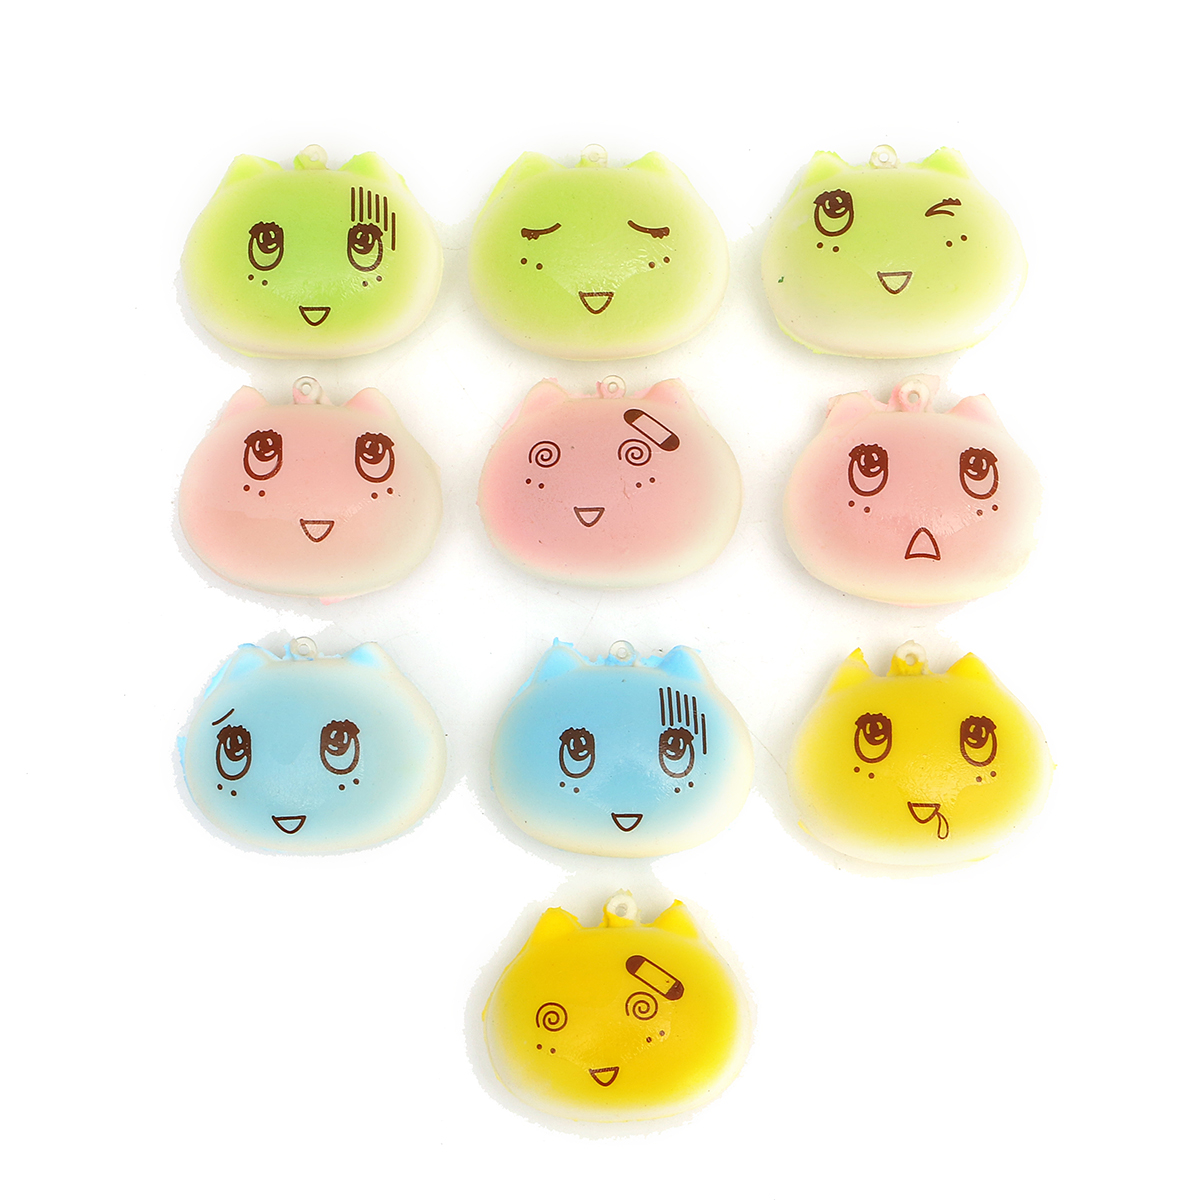 1PCS-Kawaii-Face-Simulate-Colorful-Cartoon-Totoro-Squishy-Toy-Stress-Reliever-Phone-Chain-1137334-1